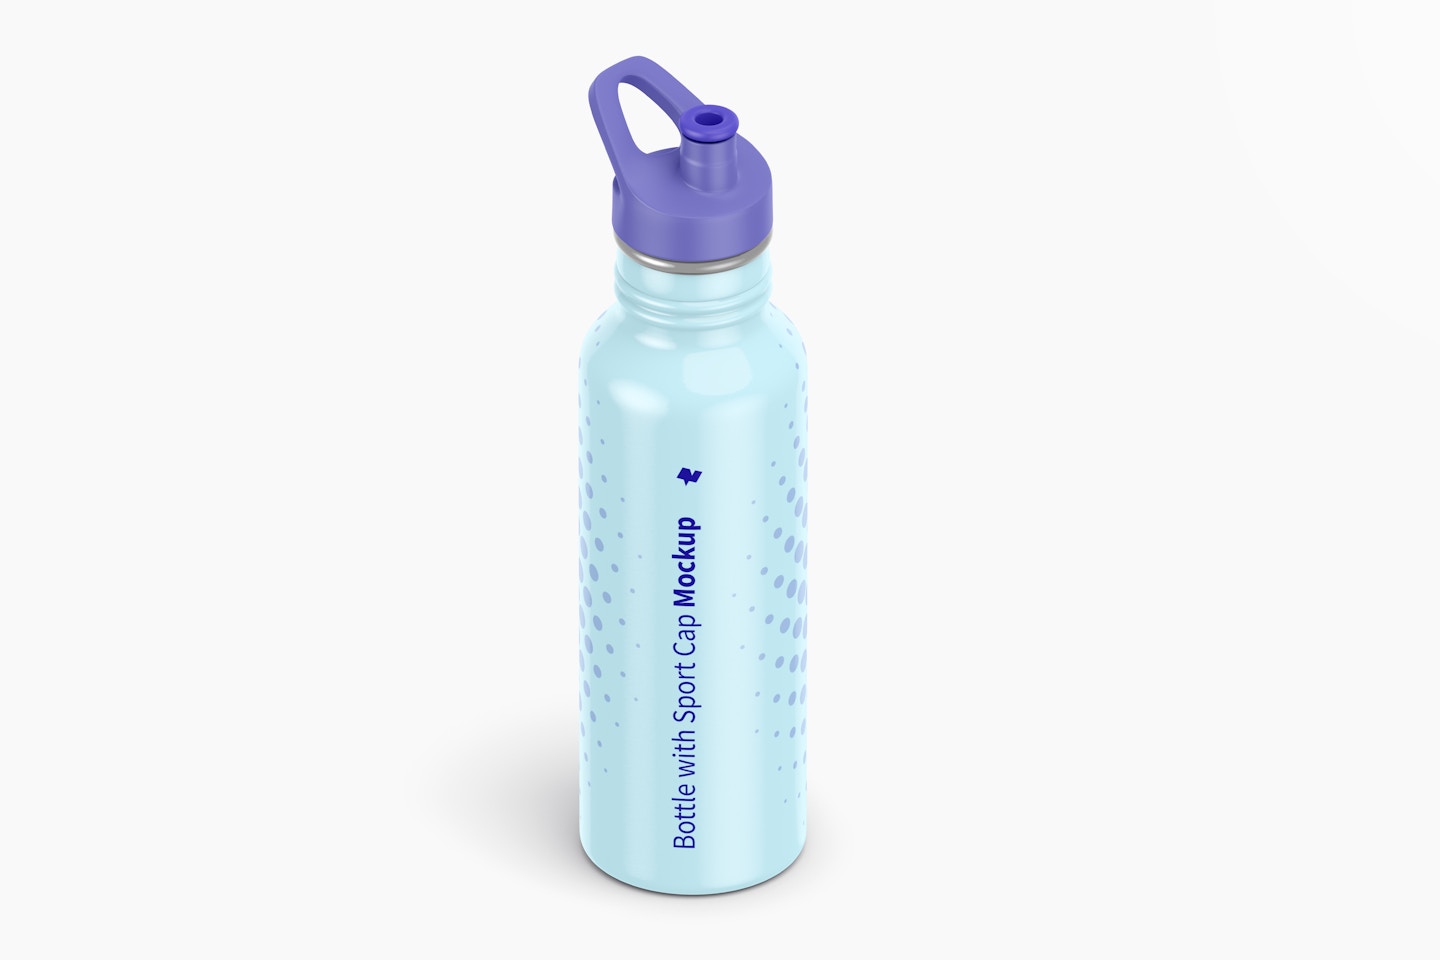 Bottle with Sport Cap Mockup, Isometric View